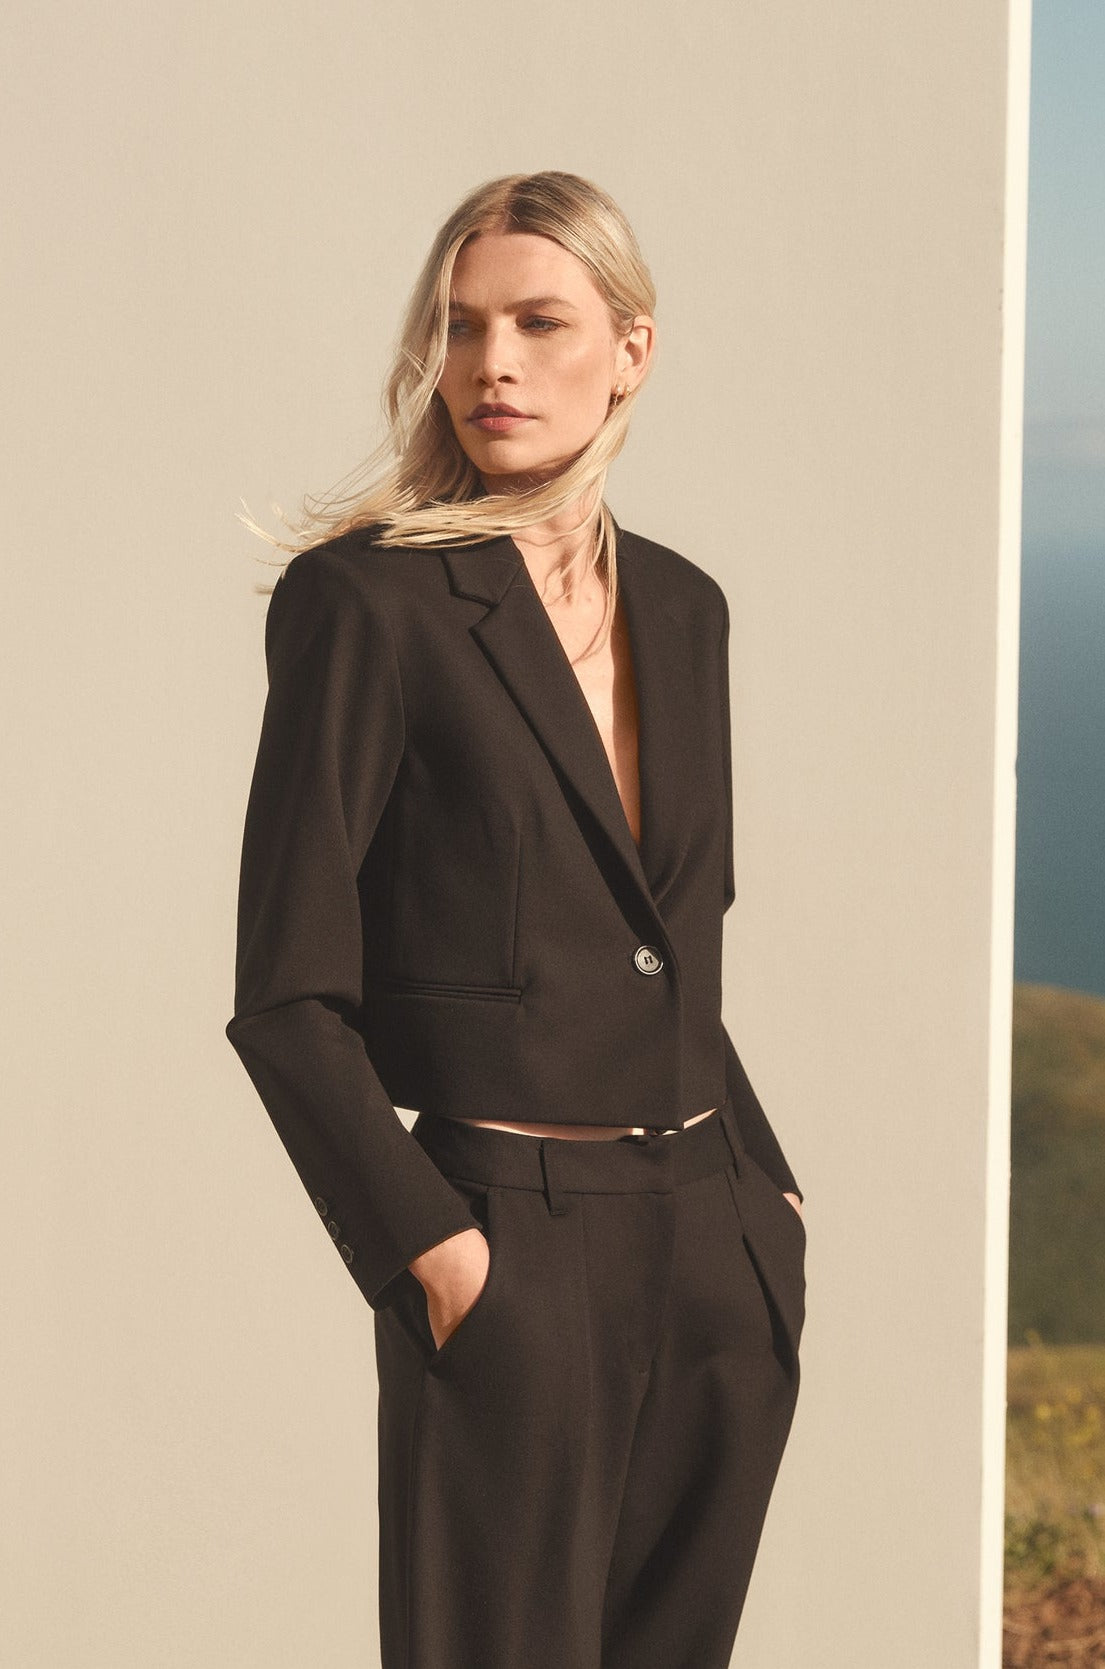   A woman wearing the Velvet by Graham & Spencer ANYA PONTI CROPPED BLAZER and pants. 